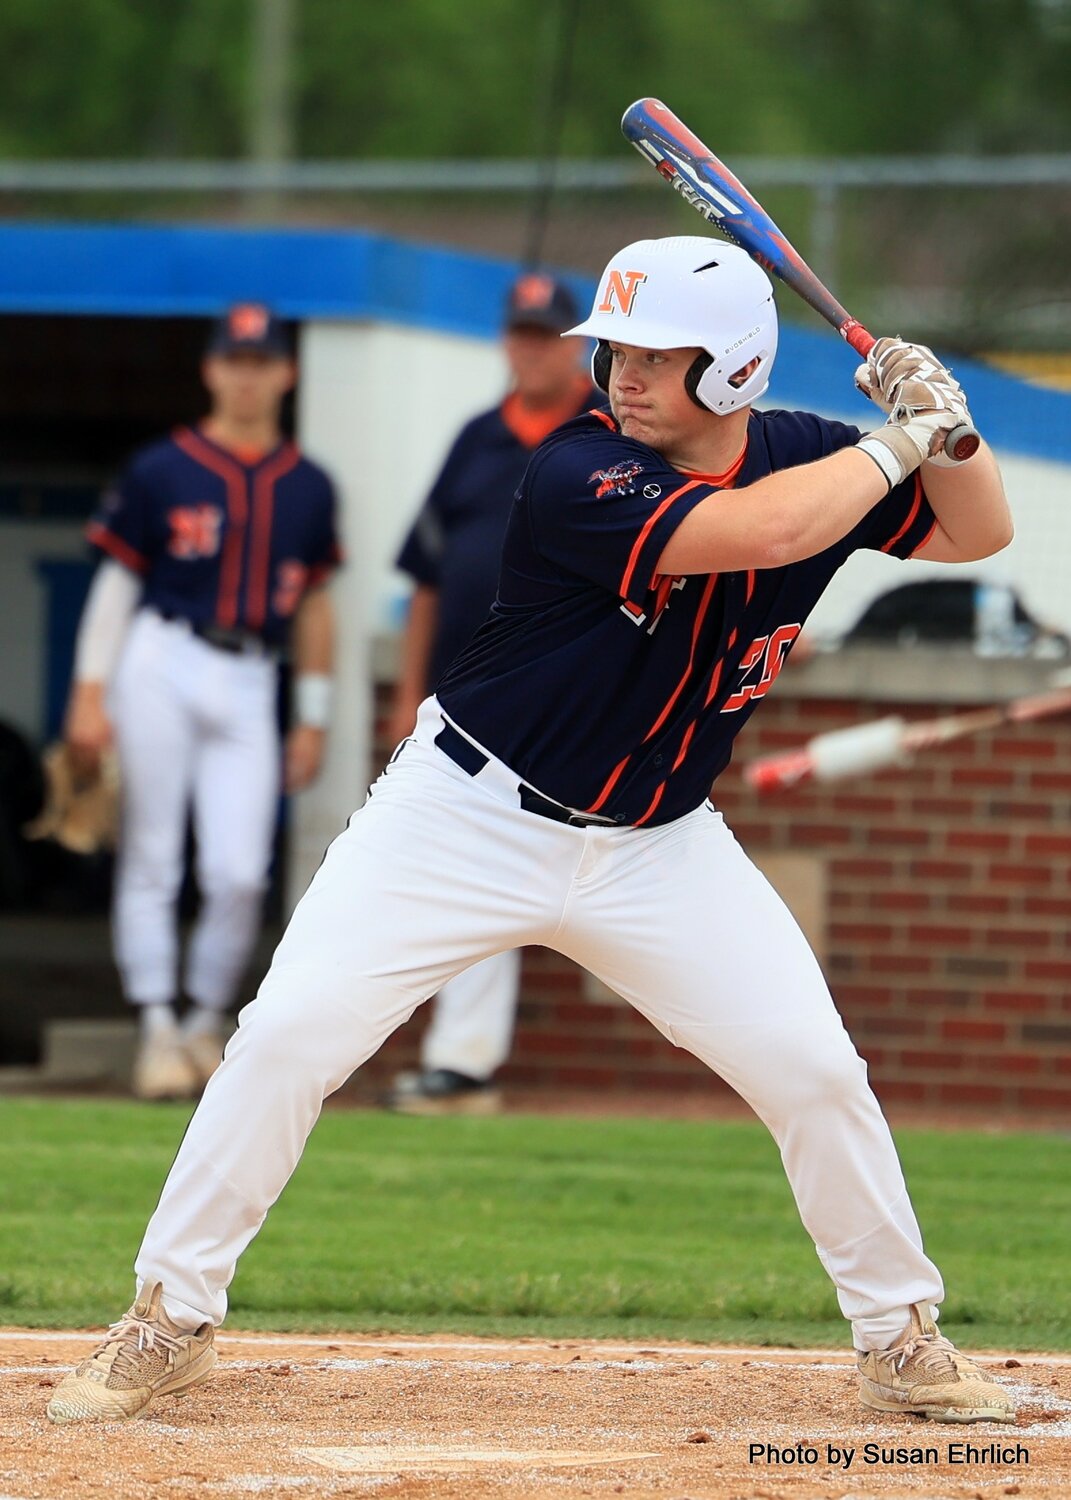 Charger senior center fielder Ross Dyson had a big RBI double to tie the game at 4-4 in the sixth inning.